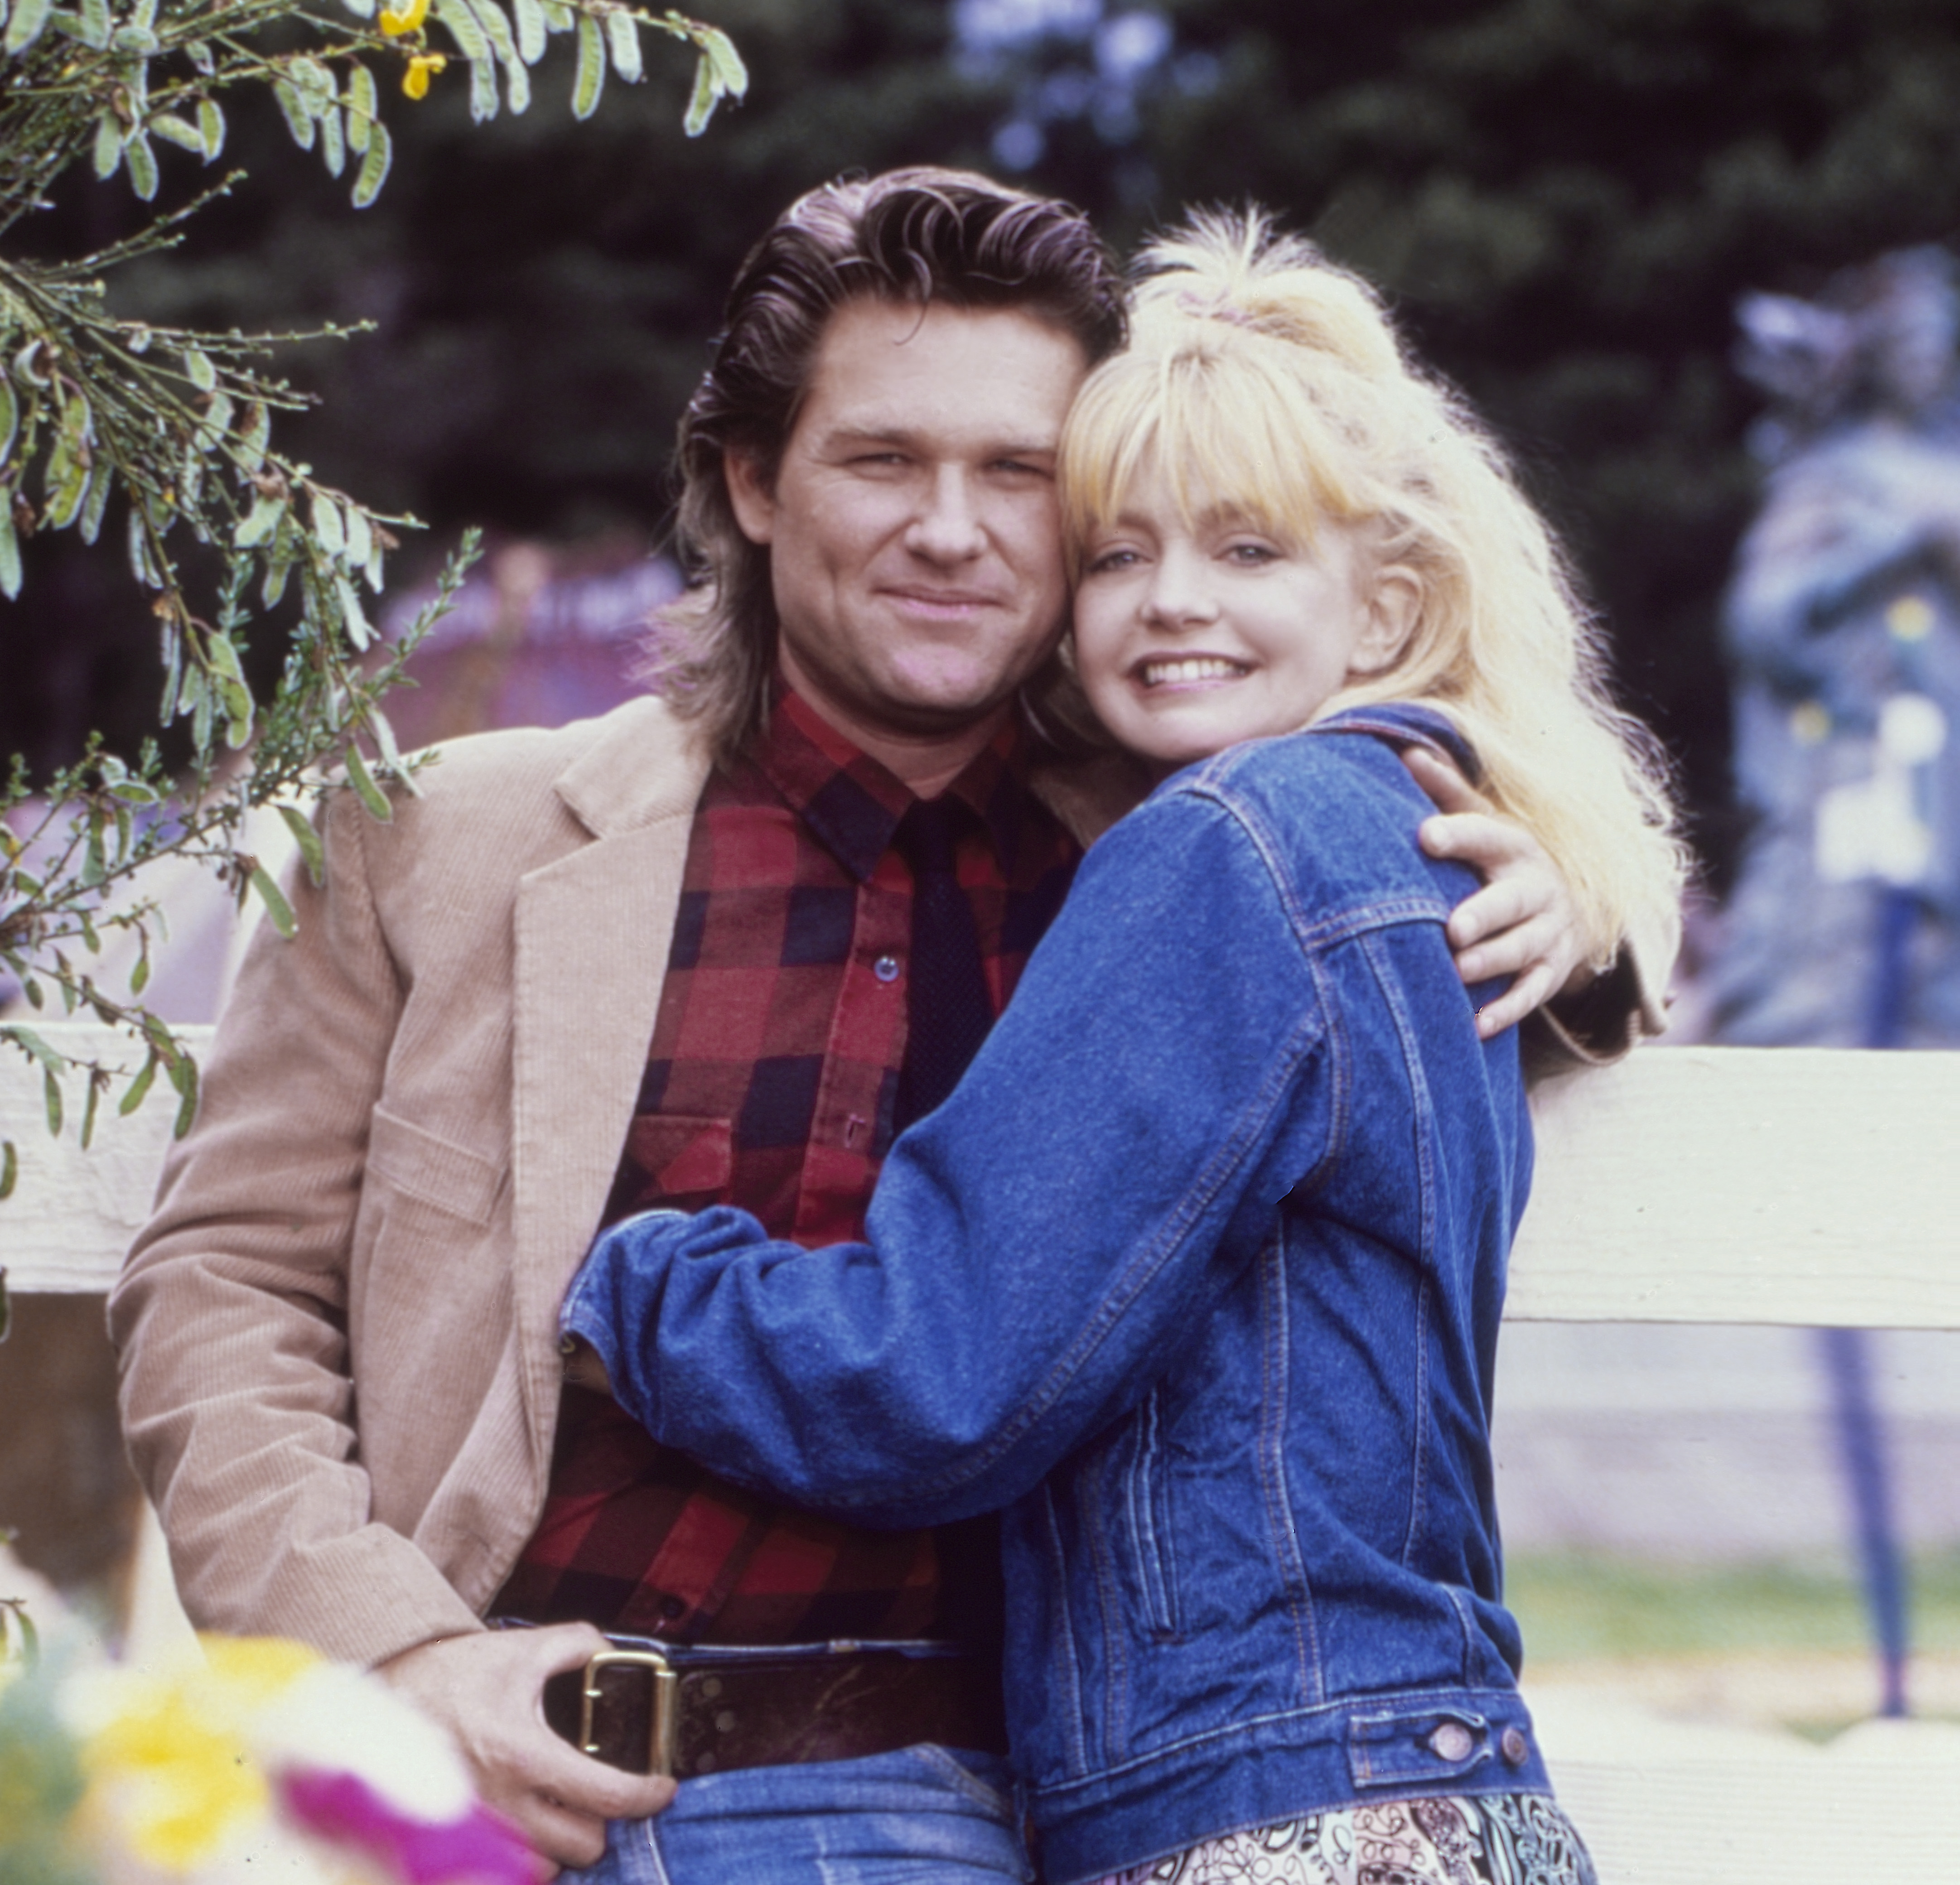 Goldie Hawn and Kurt Russell in October 1987 in Fort Bragg, California. | Source: Getty Images